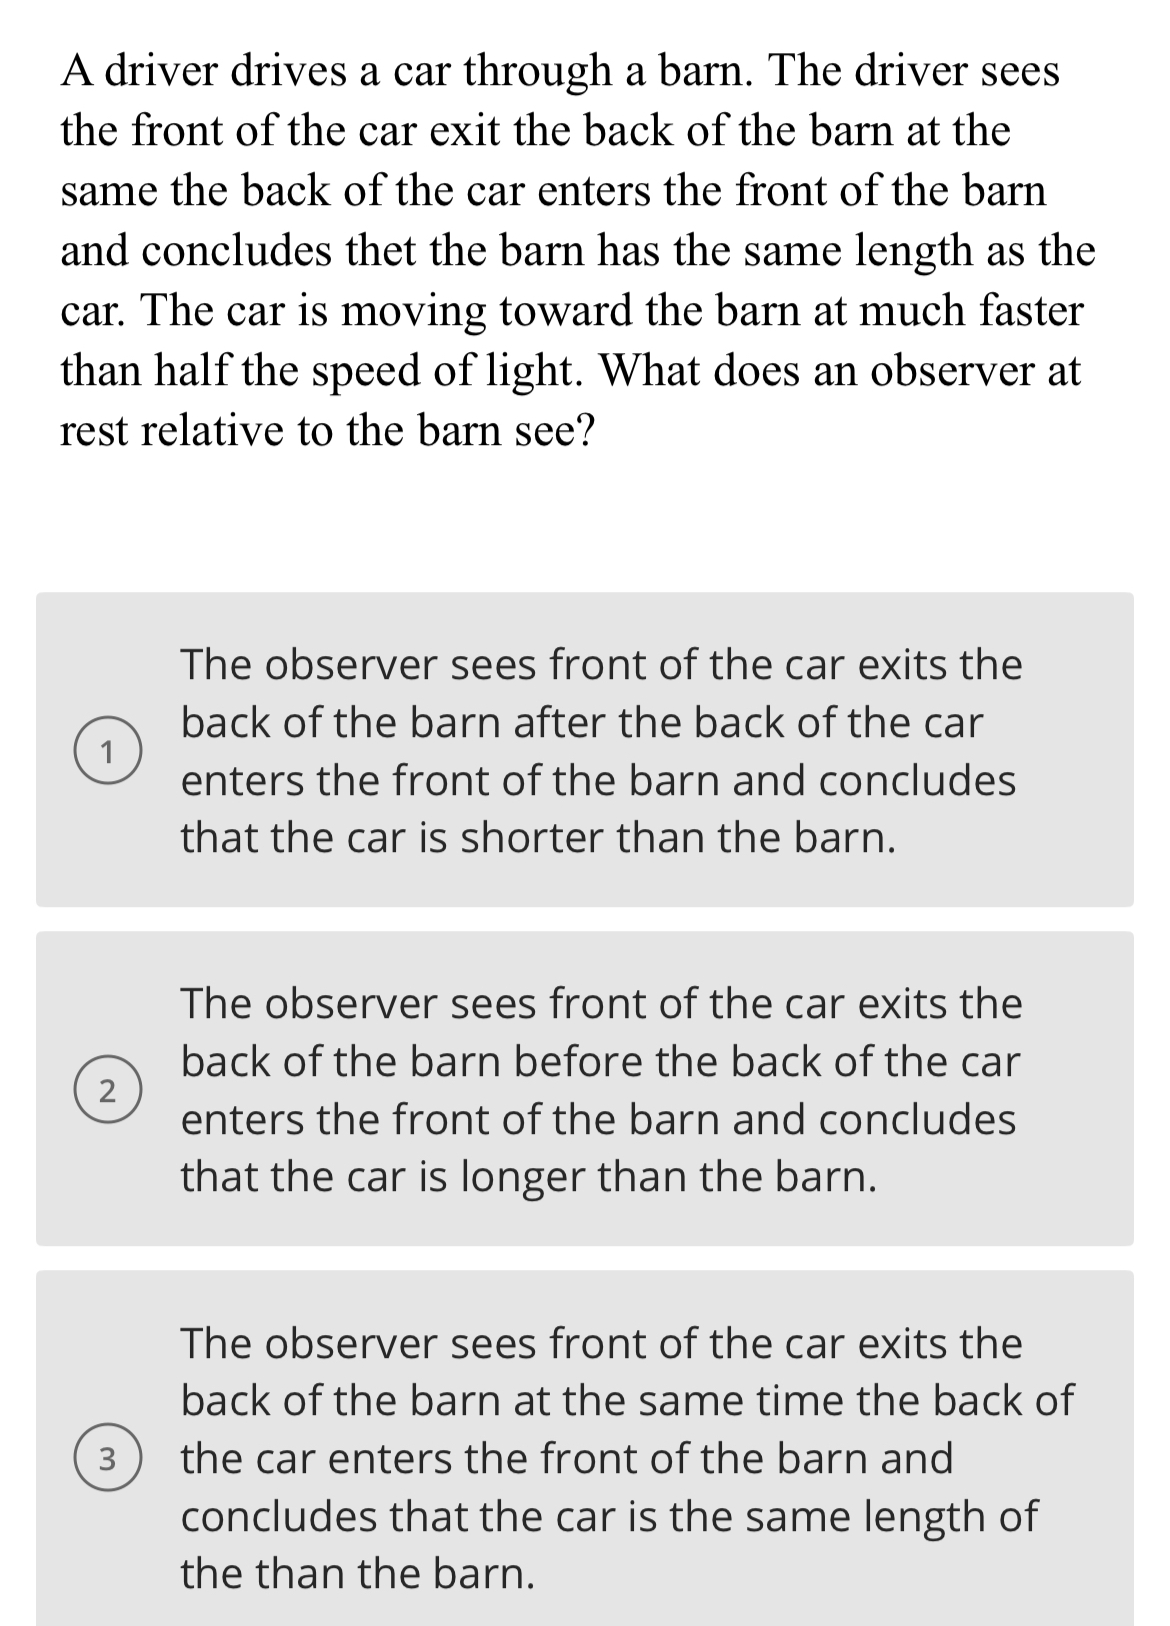 A driver drives a car through a barn. The driver sees
the front of the car exit the back of the barn at the
same the back of the car enters the front of the barn
and concludes thet the barn has the same length as the
car. The car is moving toward the barn at much faster
than half the speed of light. What does an observer at
rest relative to the barn see?
1
The observer sees front of the car exits the
back of the barn after the back of the car
enters the front of the barn and concludes
that the car is shorter than the barn.
2
The observer sees front of the car exits the
back of the barn before the back of the car
enters the front of the barn and concludes
that the car is longer than the barn.
3
The observer sees front of the car exits the
back of the barn at the same time the back of
the car enters the front of the barn and
concludes that the car is the same length of
the than the barn.